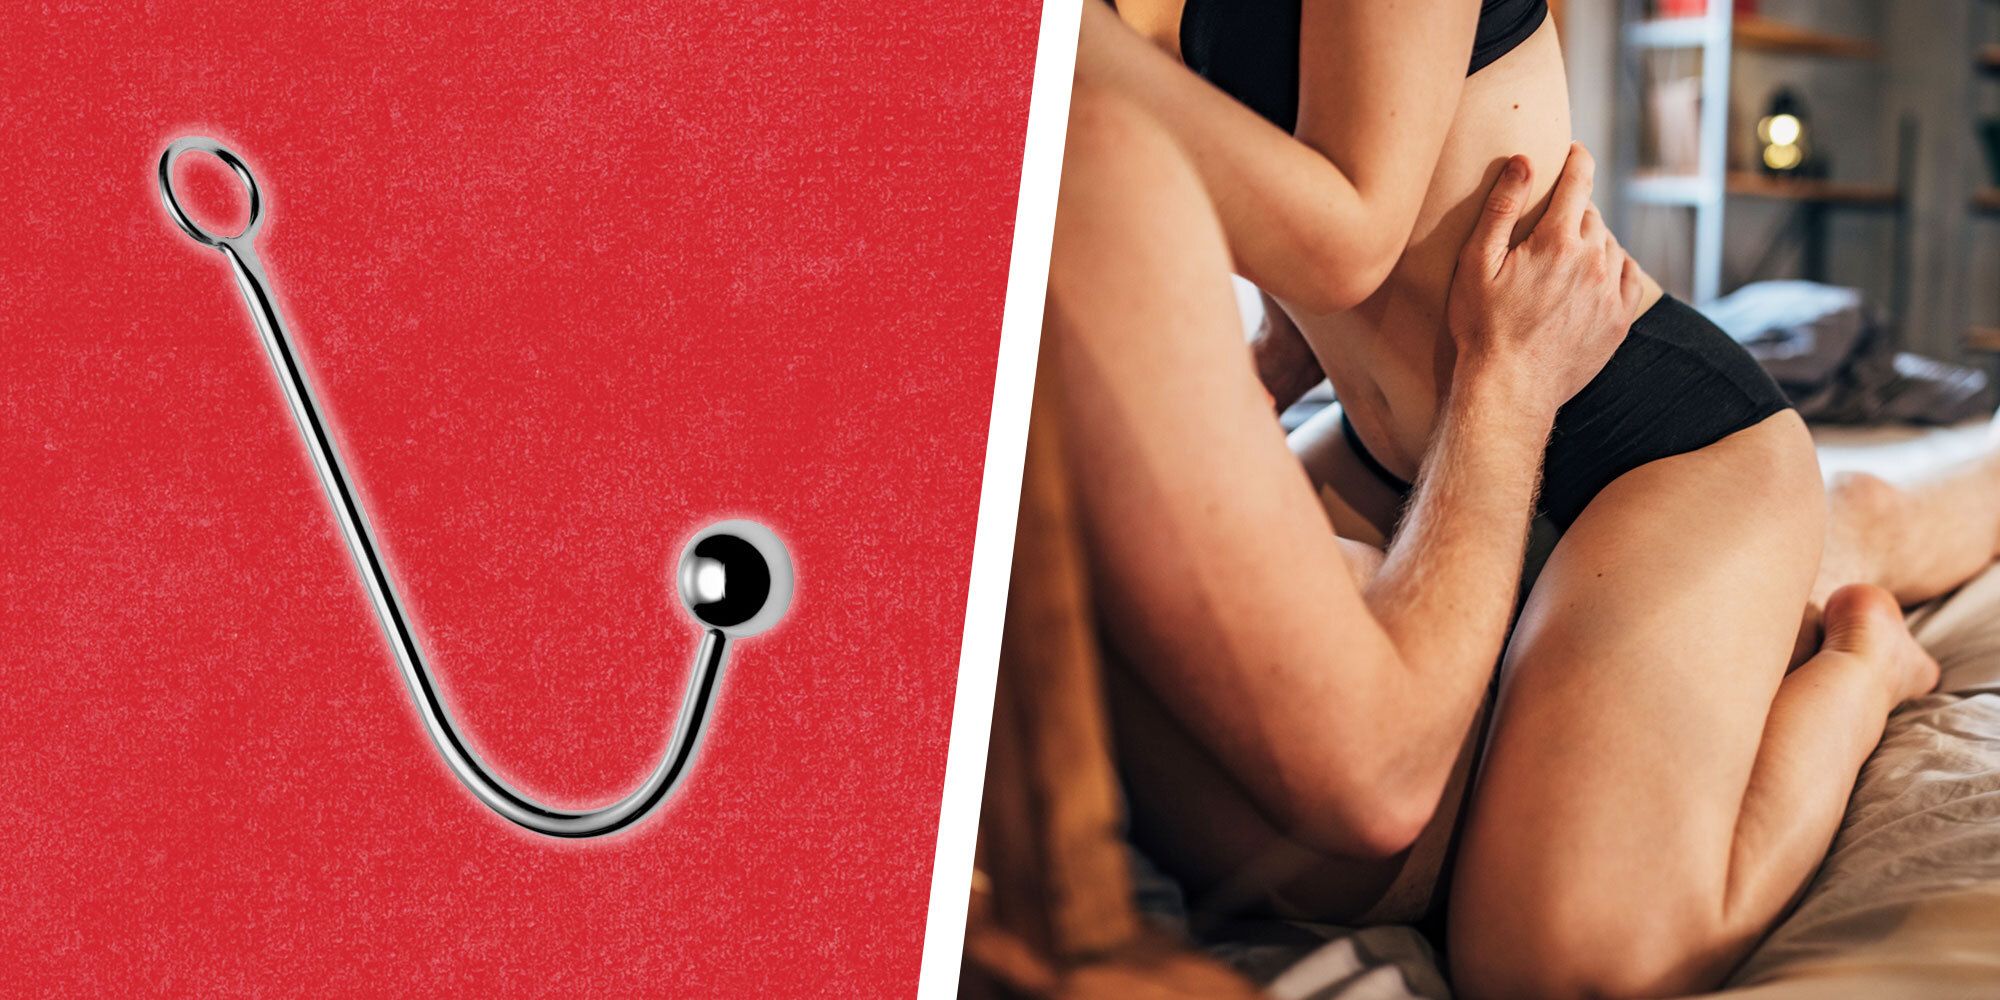 Anal Hooks: What They Are & How to Use Them, According to Experts